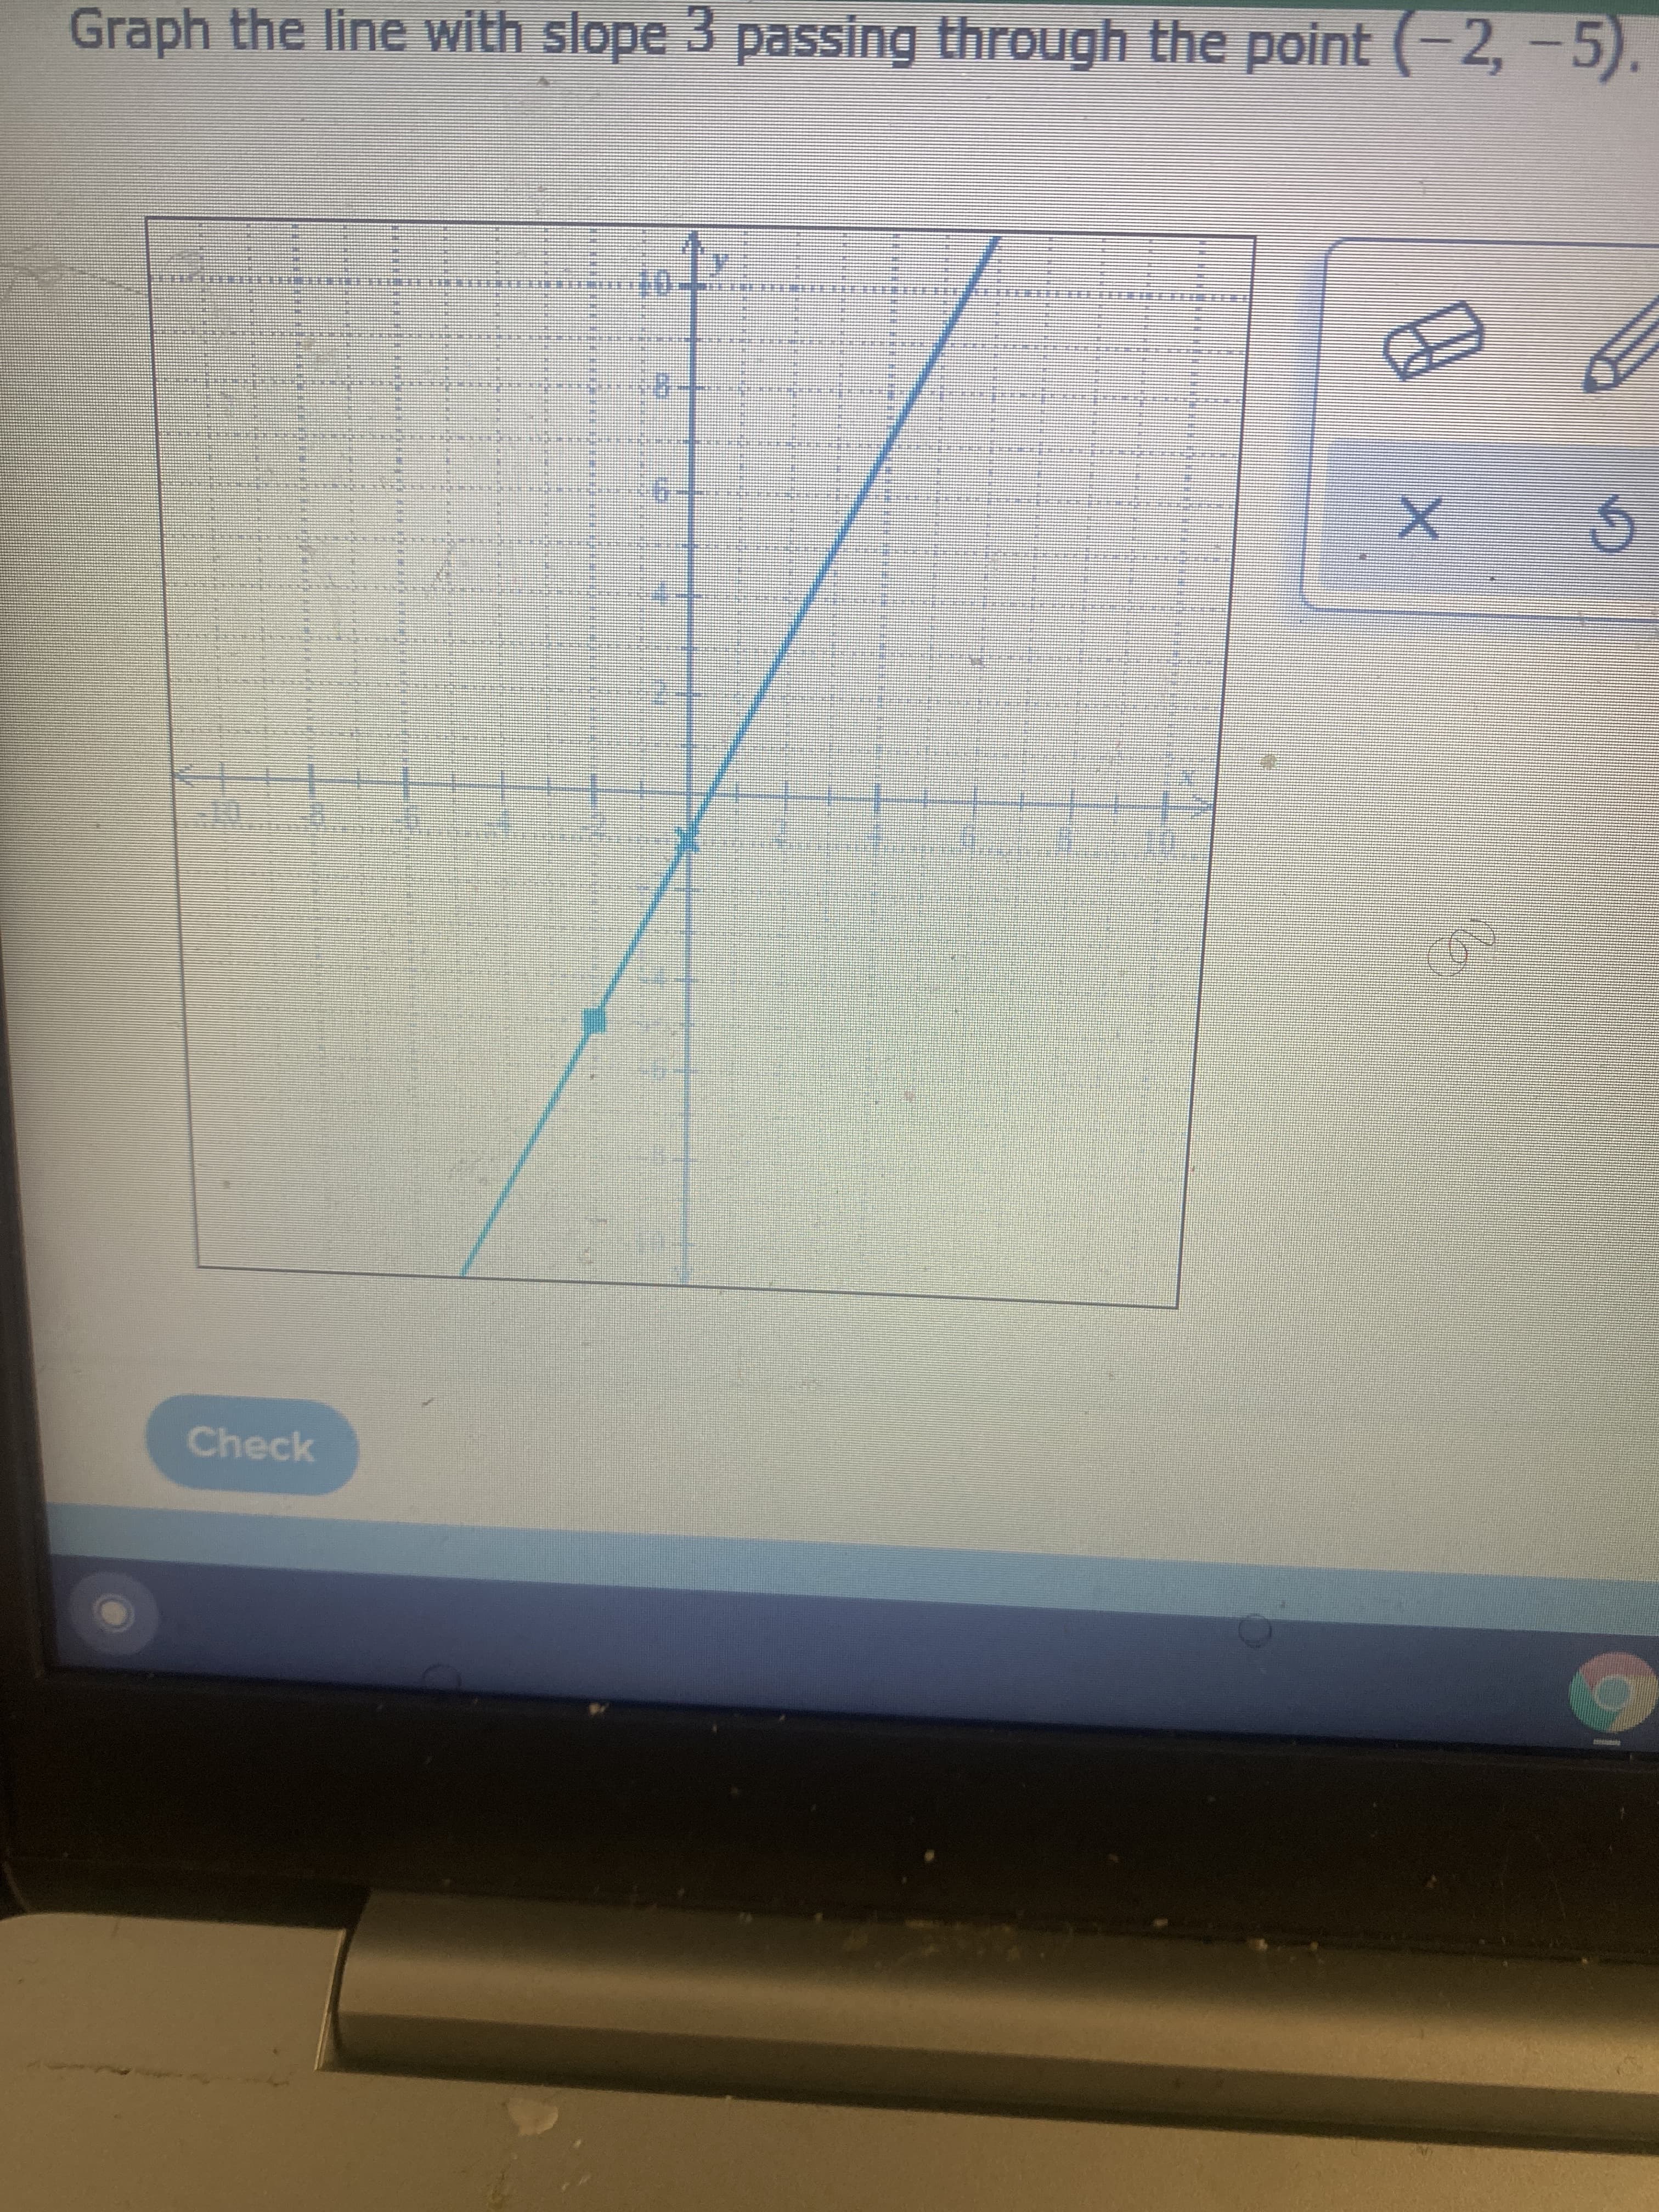 Graph the line with slope 3 passing through the point (-2,-5)
